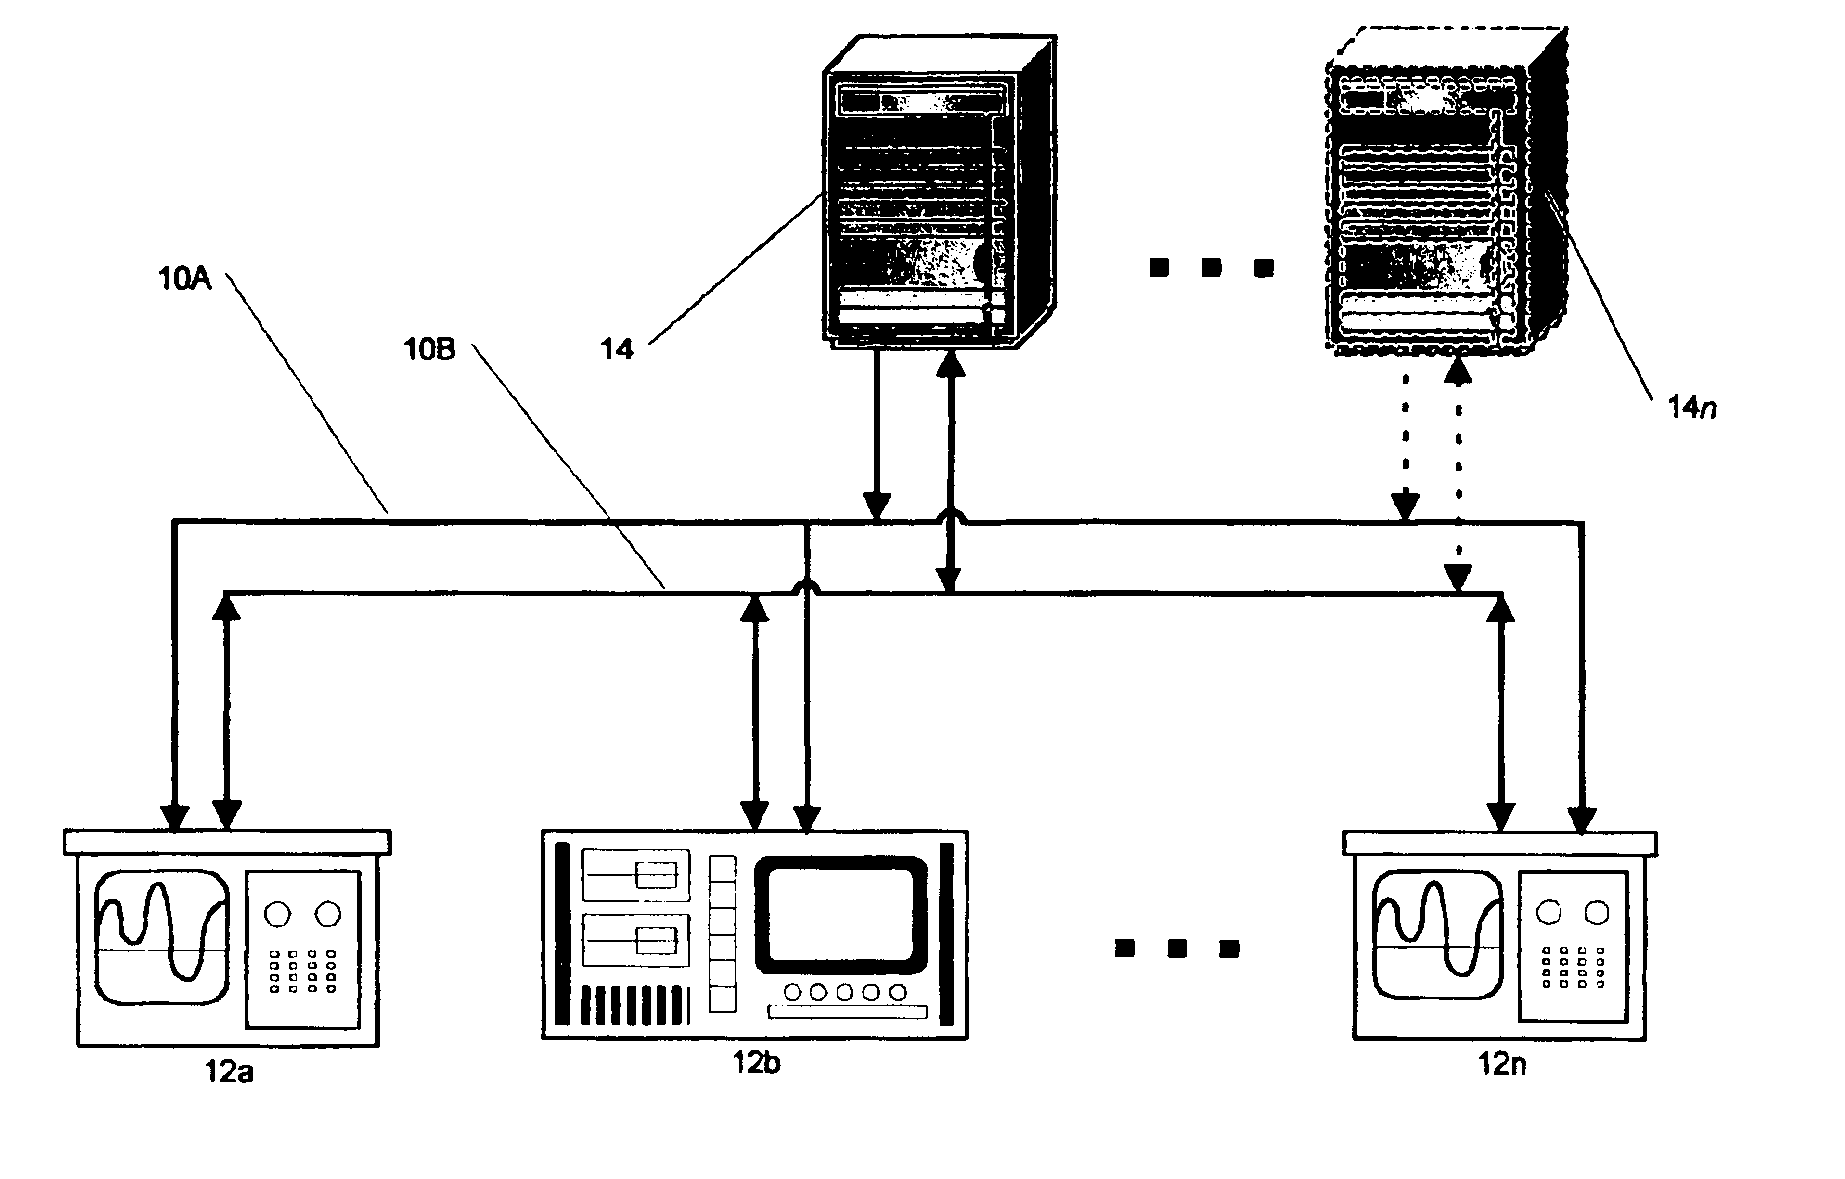 Method and apparatus for efficient use of communication channels for remote telemetry